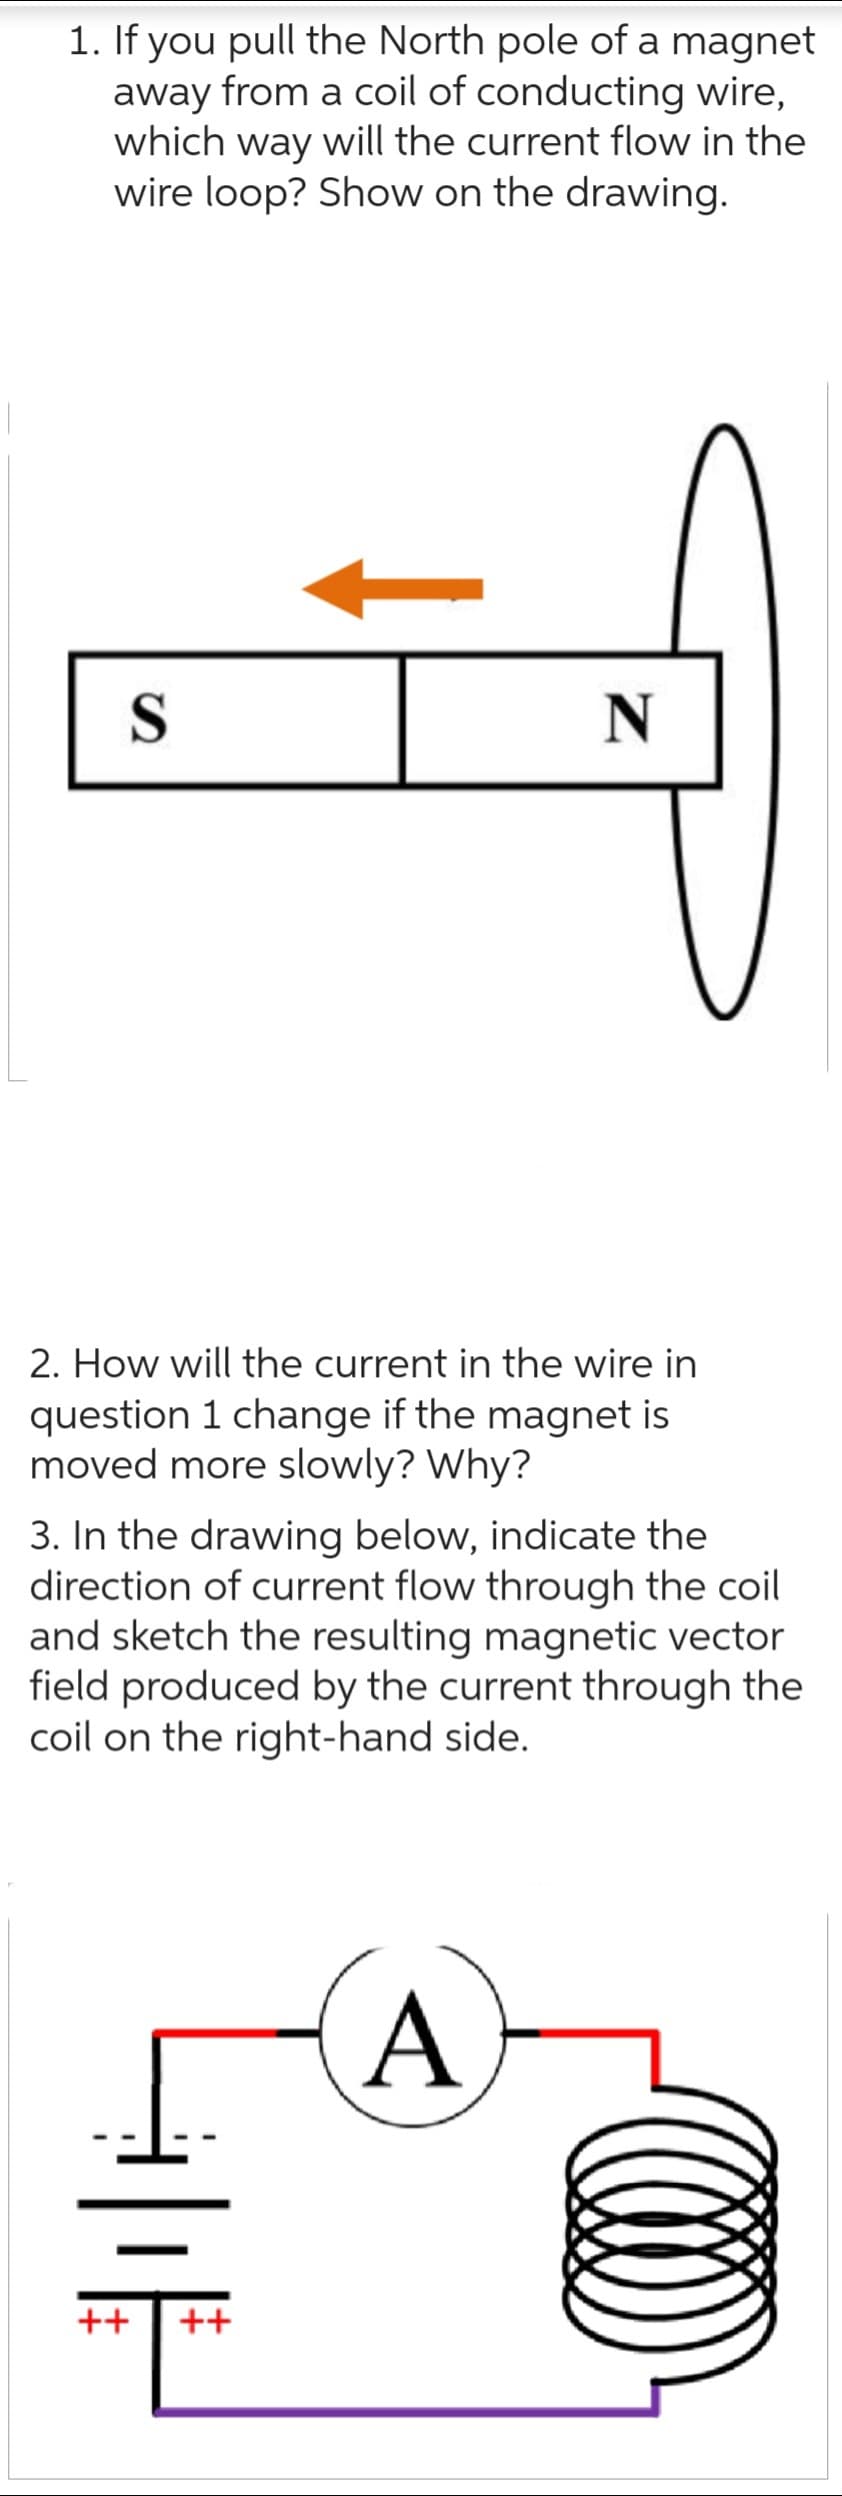 1. If you pull the North pole of a magnet
away from a coil of conducting wire,
which way will the current flow in the
wire loop? Show on the drawing.
S
2. How will the current in the wire in
question 1 change if the magnet is
moved more slowly? Why?
N
3. In the drawing below, indicate the
direction of current flow through the coil
and sketch the resulting magnetic vector
field produced by the current through the
coil on the right-hand side.
++ ++
A